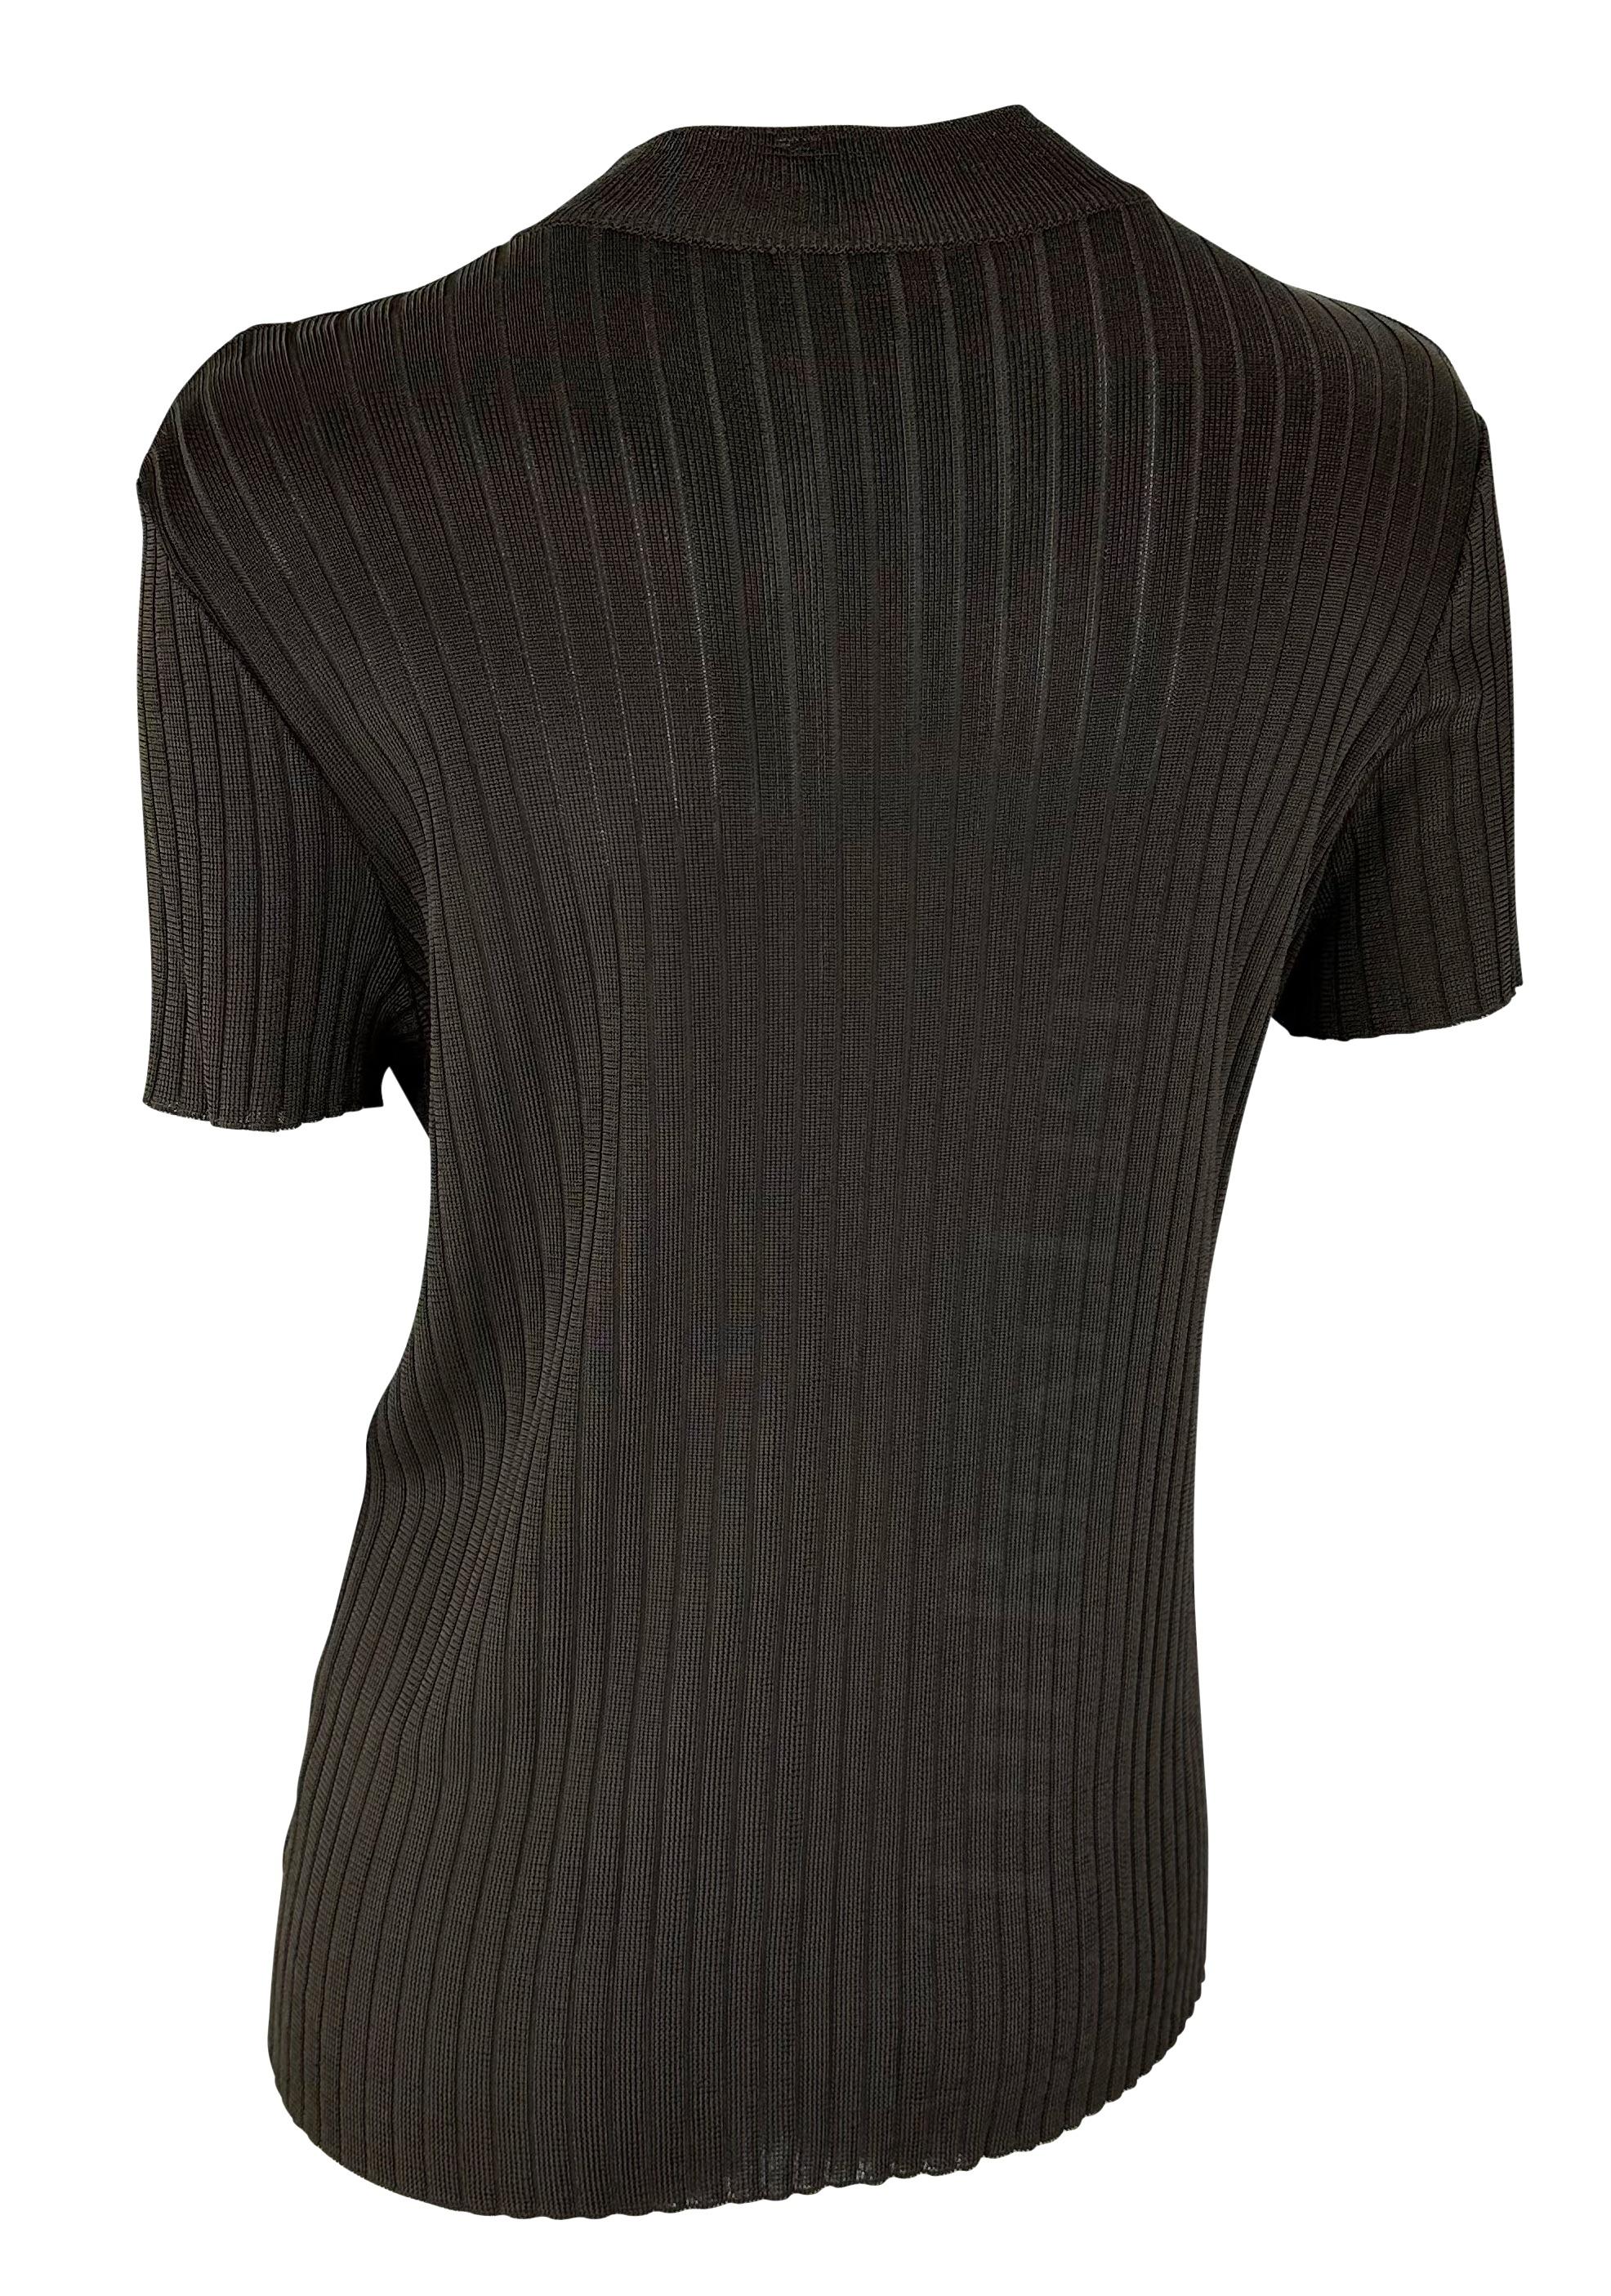 Women's S/S 1997 Gucci by Tom Ford Brown Sheer Knit Mockneck Stretch T-Shirt